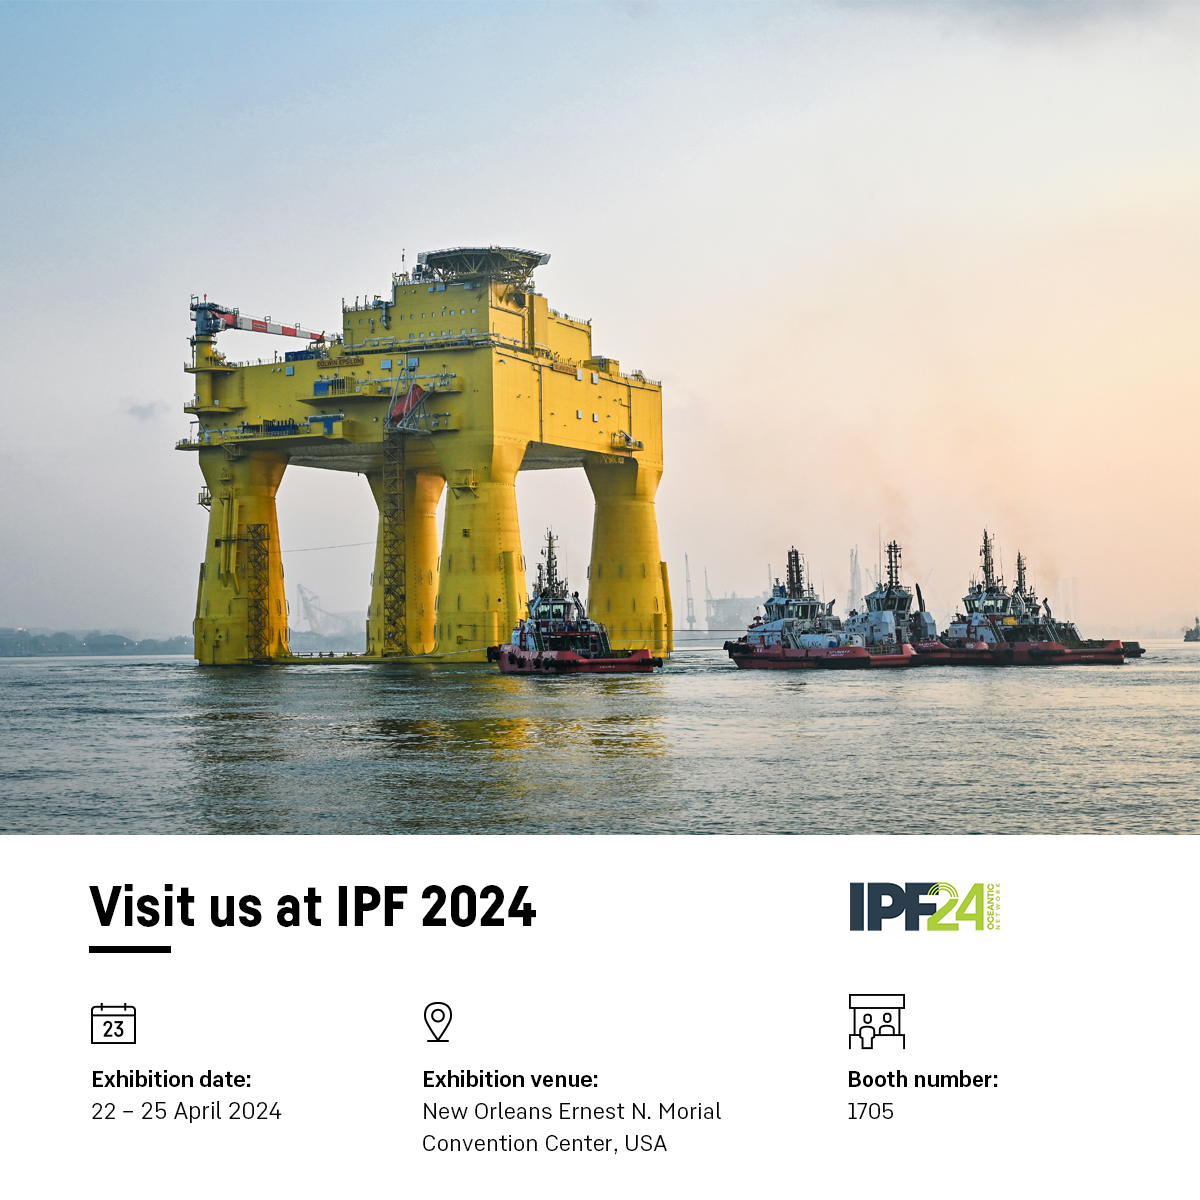 Here we go again! The #IPFconf starts on 22 April, and we will be present. If you haven't made any plans yet, come find us at our booth 1705 to talk with us about the #offshore and #windindustry.

Register now: oceantic.org/oceantic-event…

#liebherr #2024IPF @oceanticnetwork